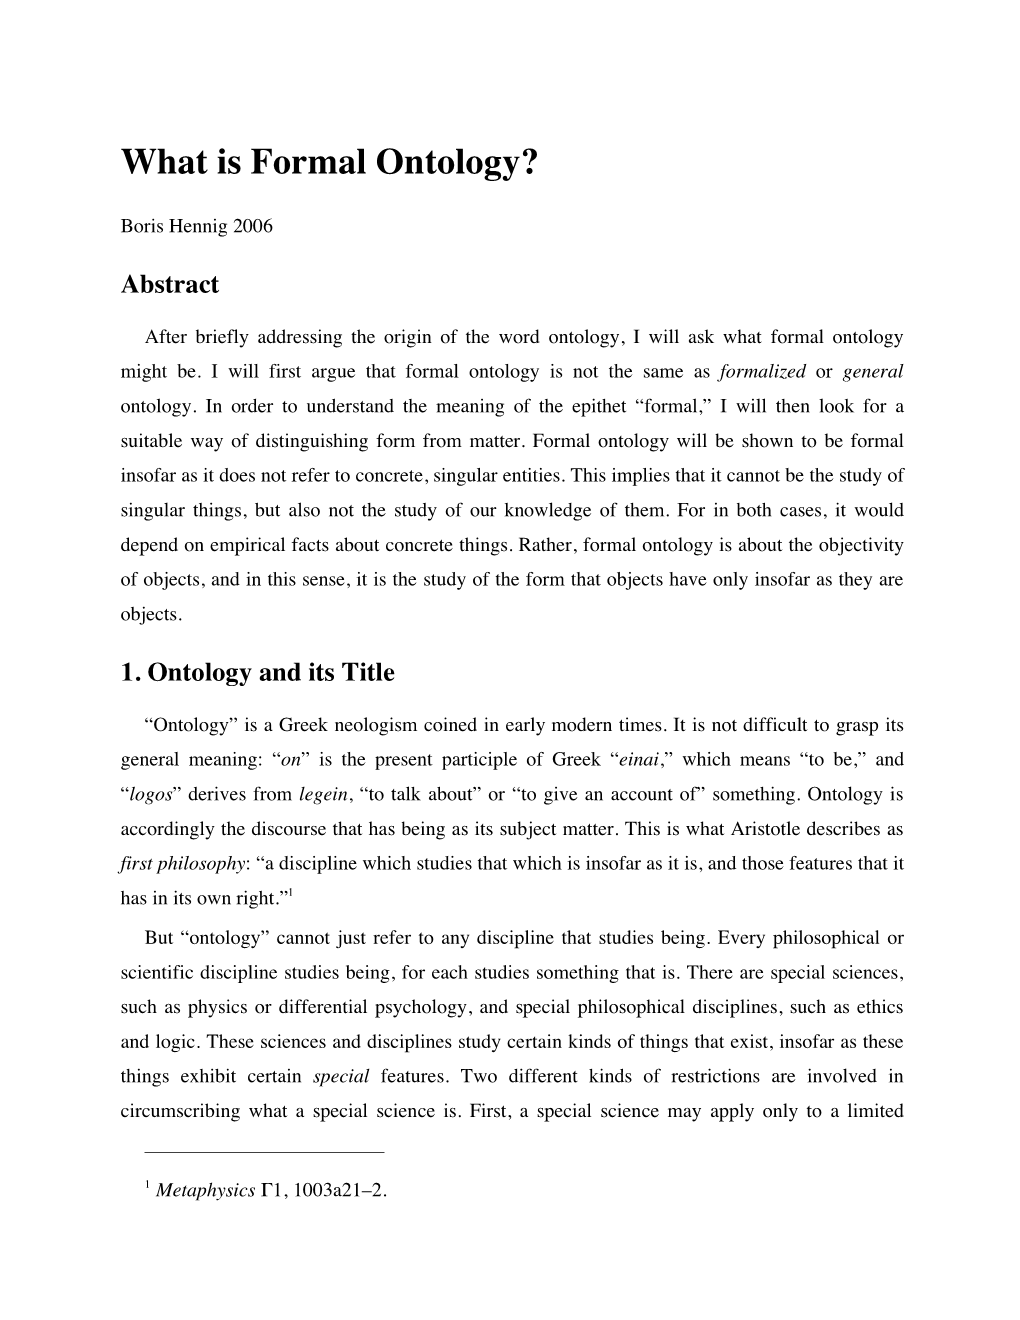 What Is Formal Ontology?